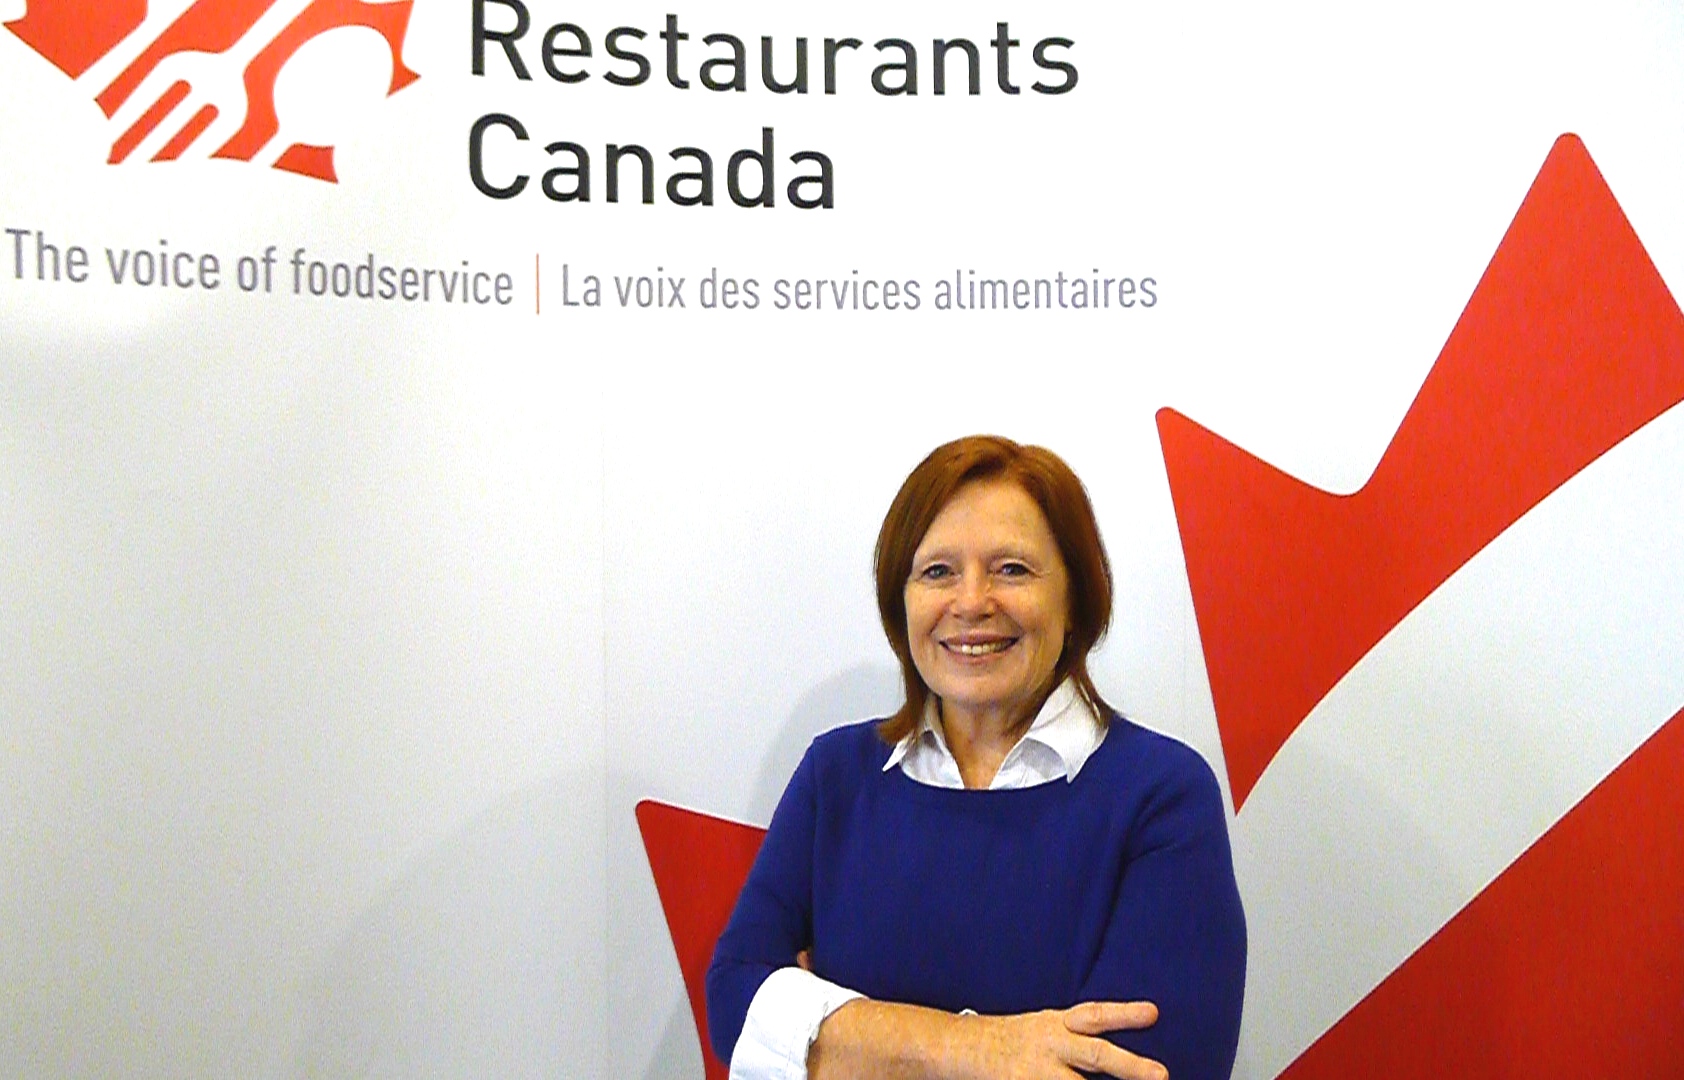 President and CEO of Restaurants Canada (formally the CFRA), Donna Dooher, at their new home on Queen West.